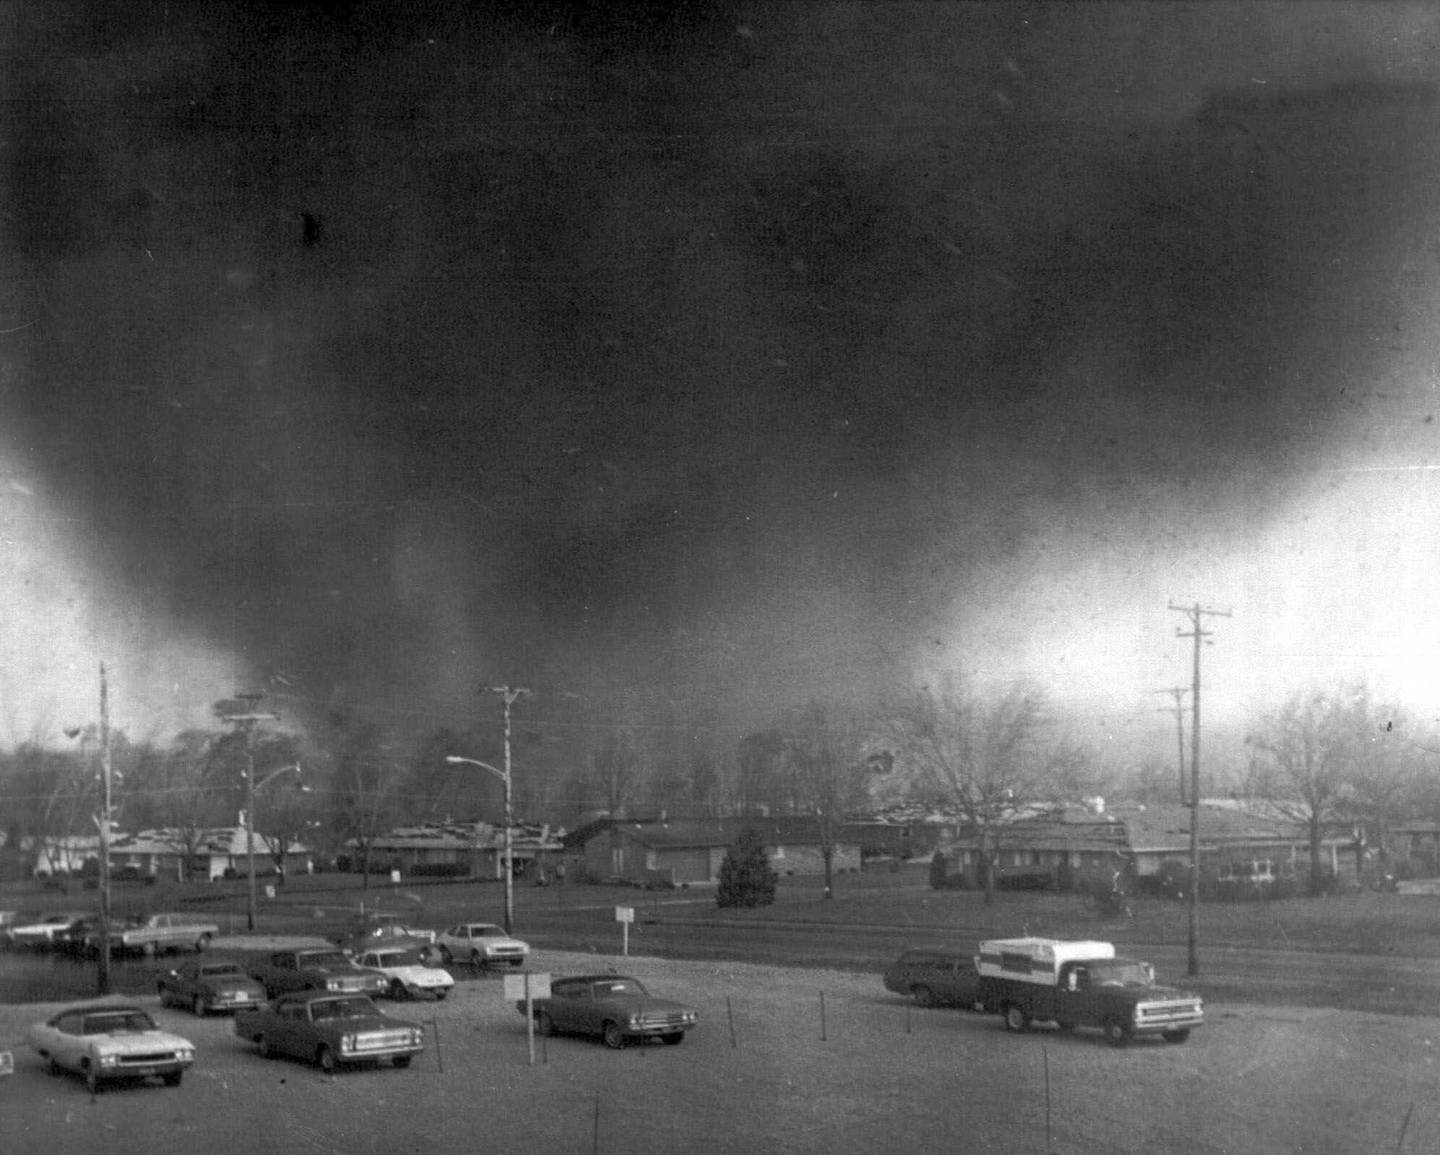 A tornado funnel moves through the southeast Pine Crest Garden section of Xenia, Ohio, on April 3, 1974. The deadly tornado killed 32 people, injured hundreds and leveled half the city of 25,000. Nearby Wilberforce was also hit hard. As the Watergate scandal unfolded in Washington, President Richard Nixon made an unannounced visit to Xenia to tour the damage. Xenia's was the deadliest and most powerful tornado of the 1974 Super Outbreak.